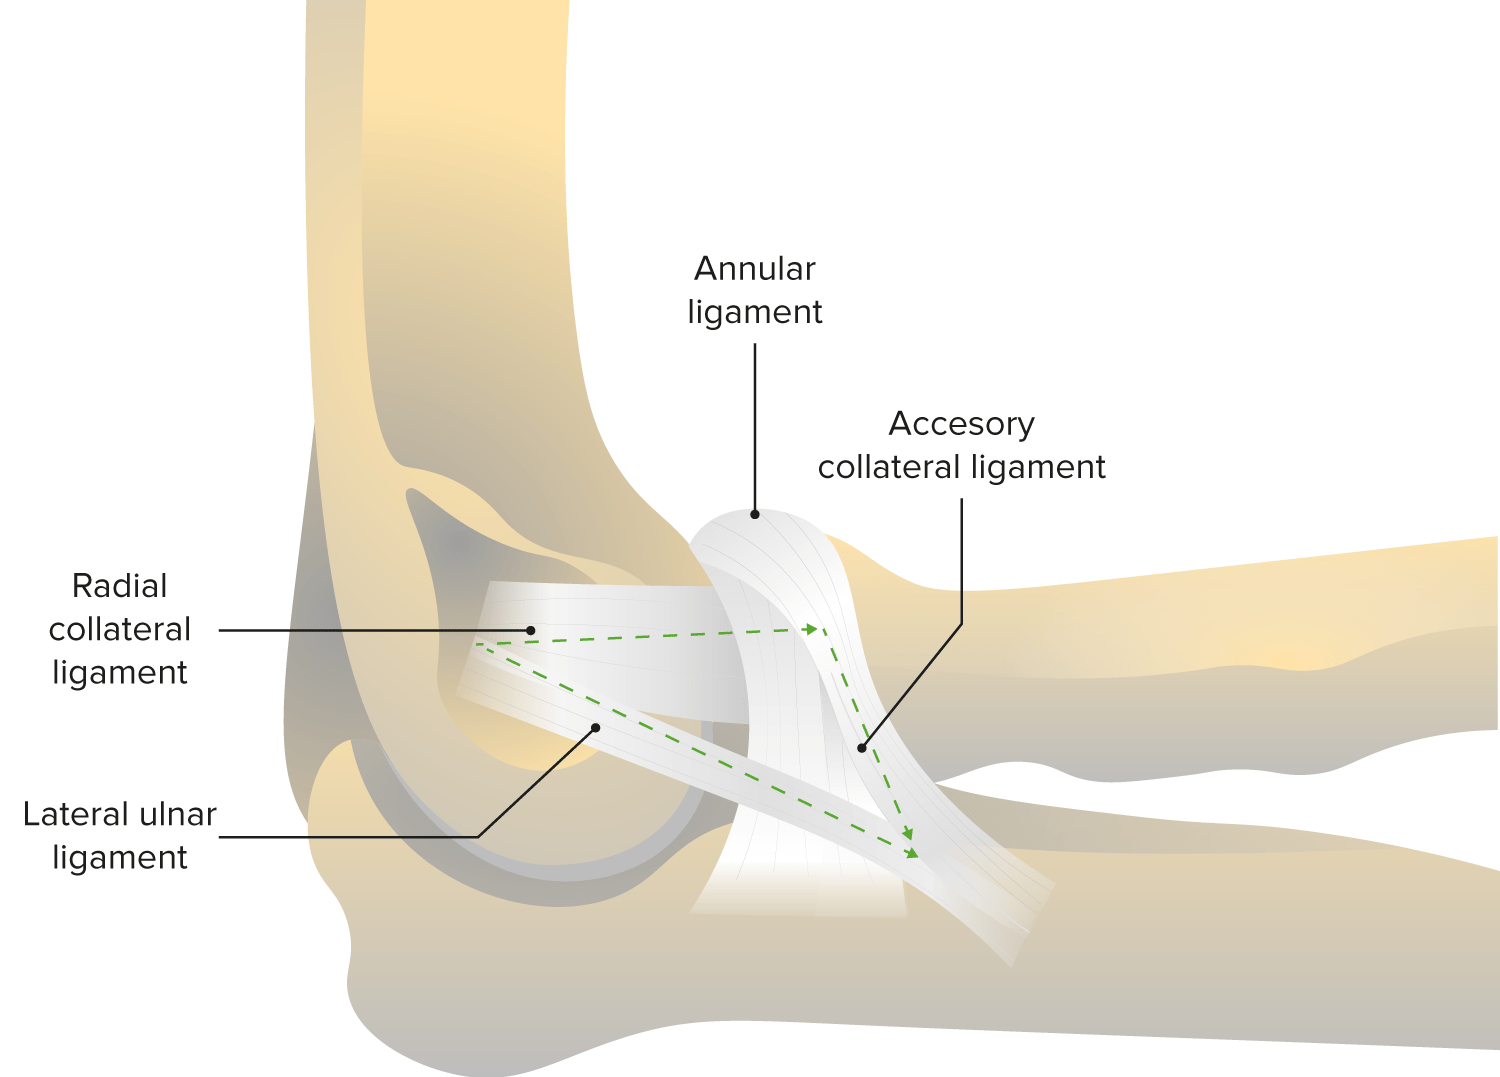 Annular ligament and radial collateral ligament